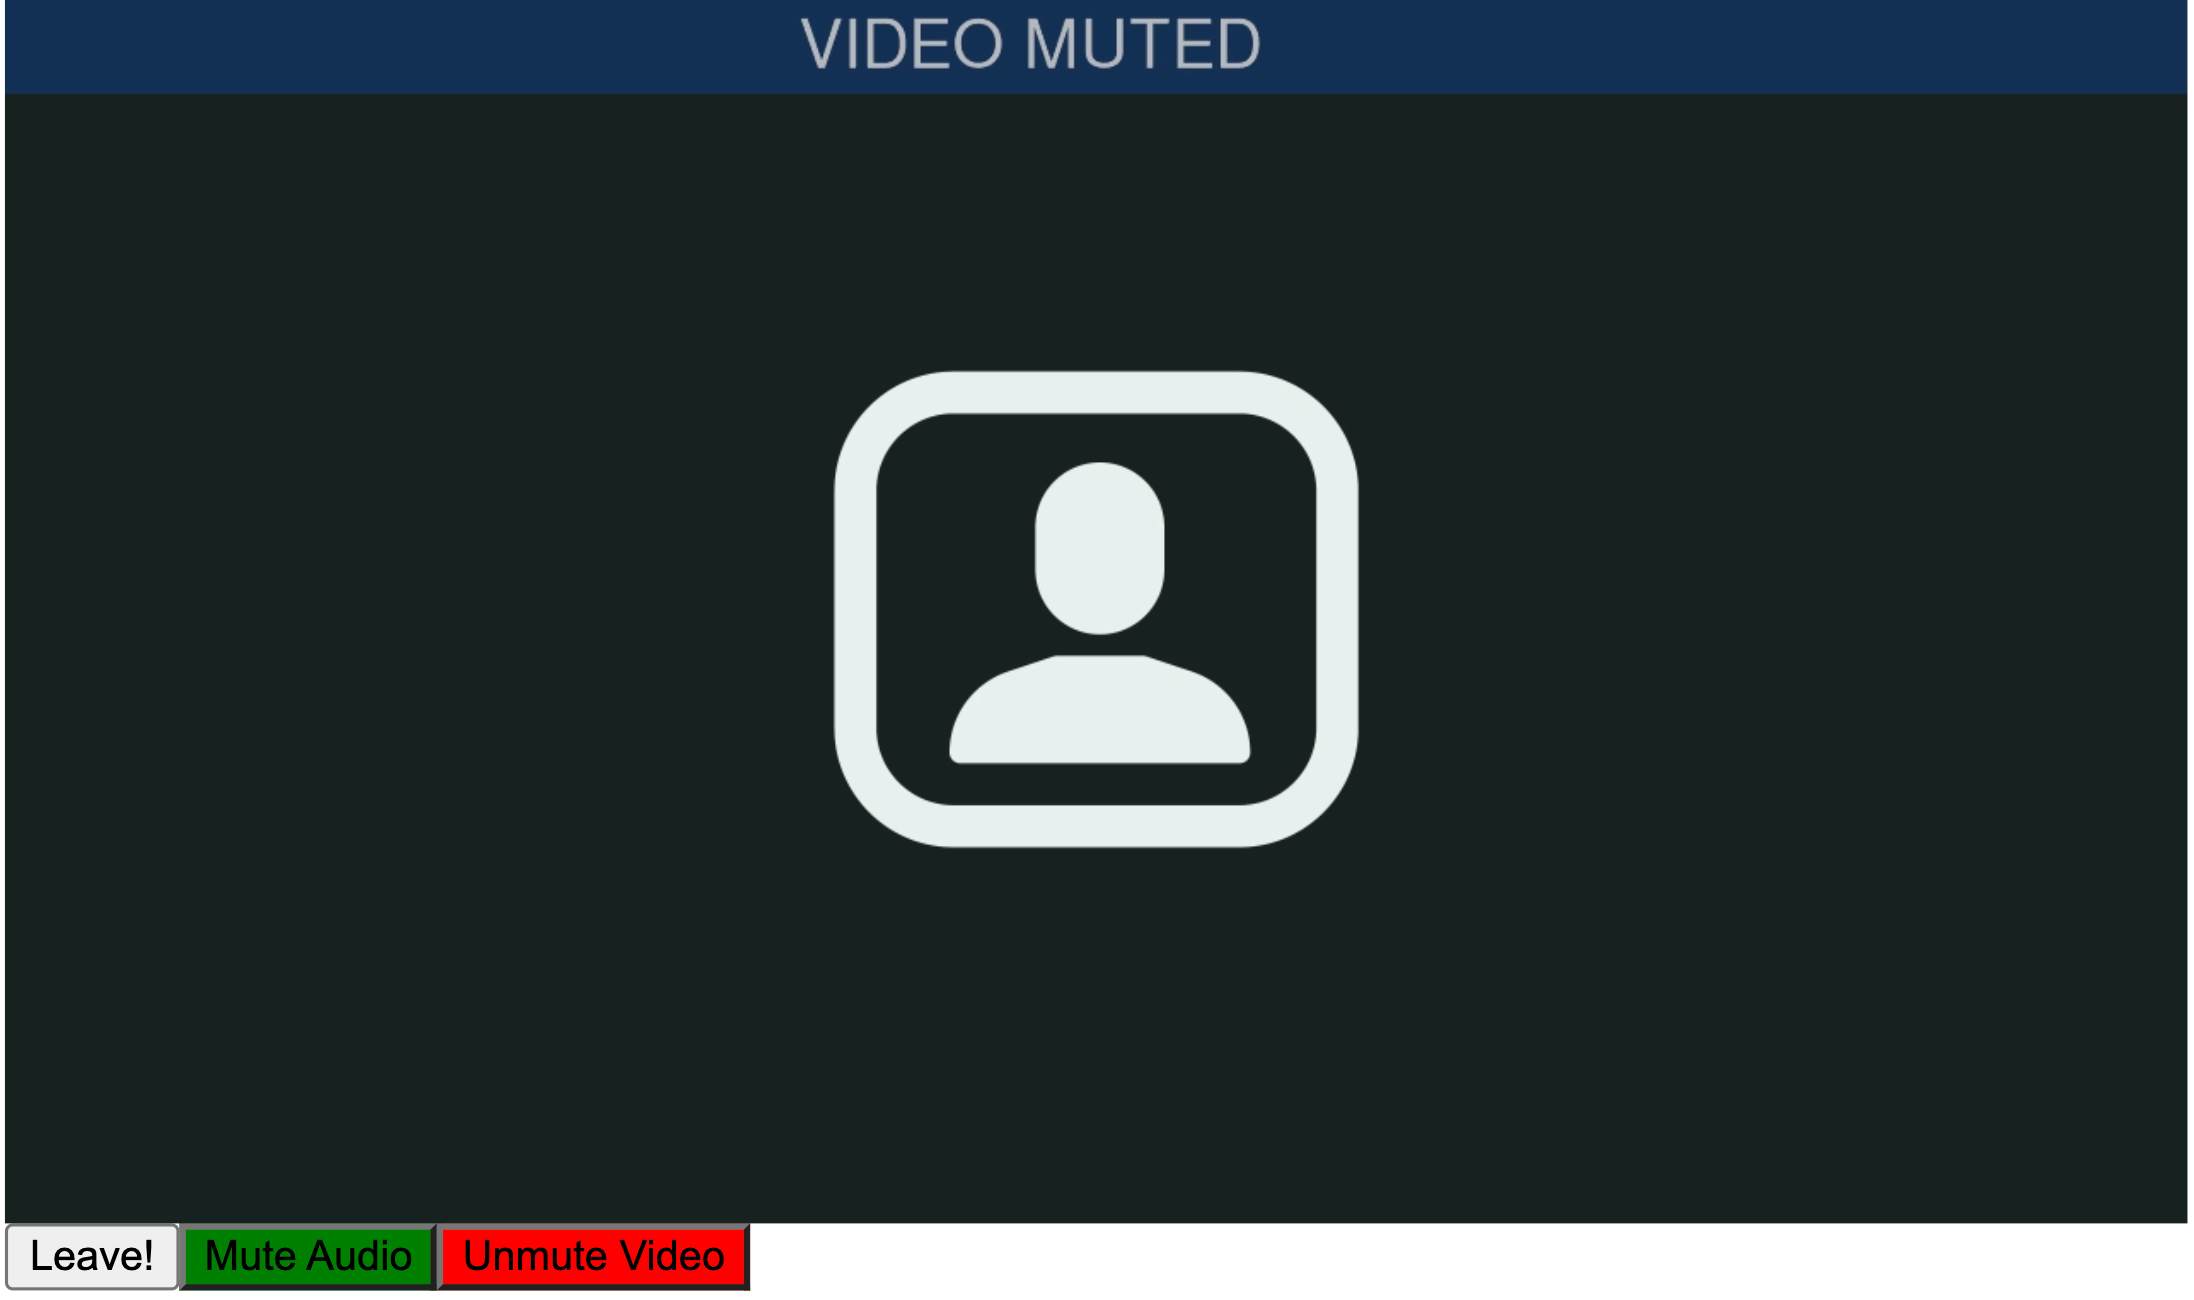 A screenshot of the React application. Buttons beneath the video allow the user to Leave, Mute or Unmute Audio, and Mute or Unmute Video.